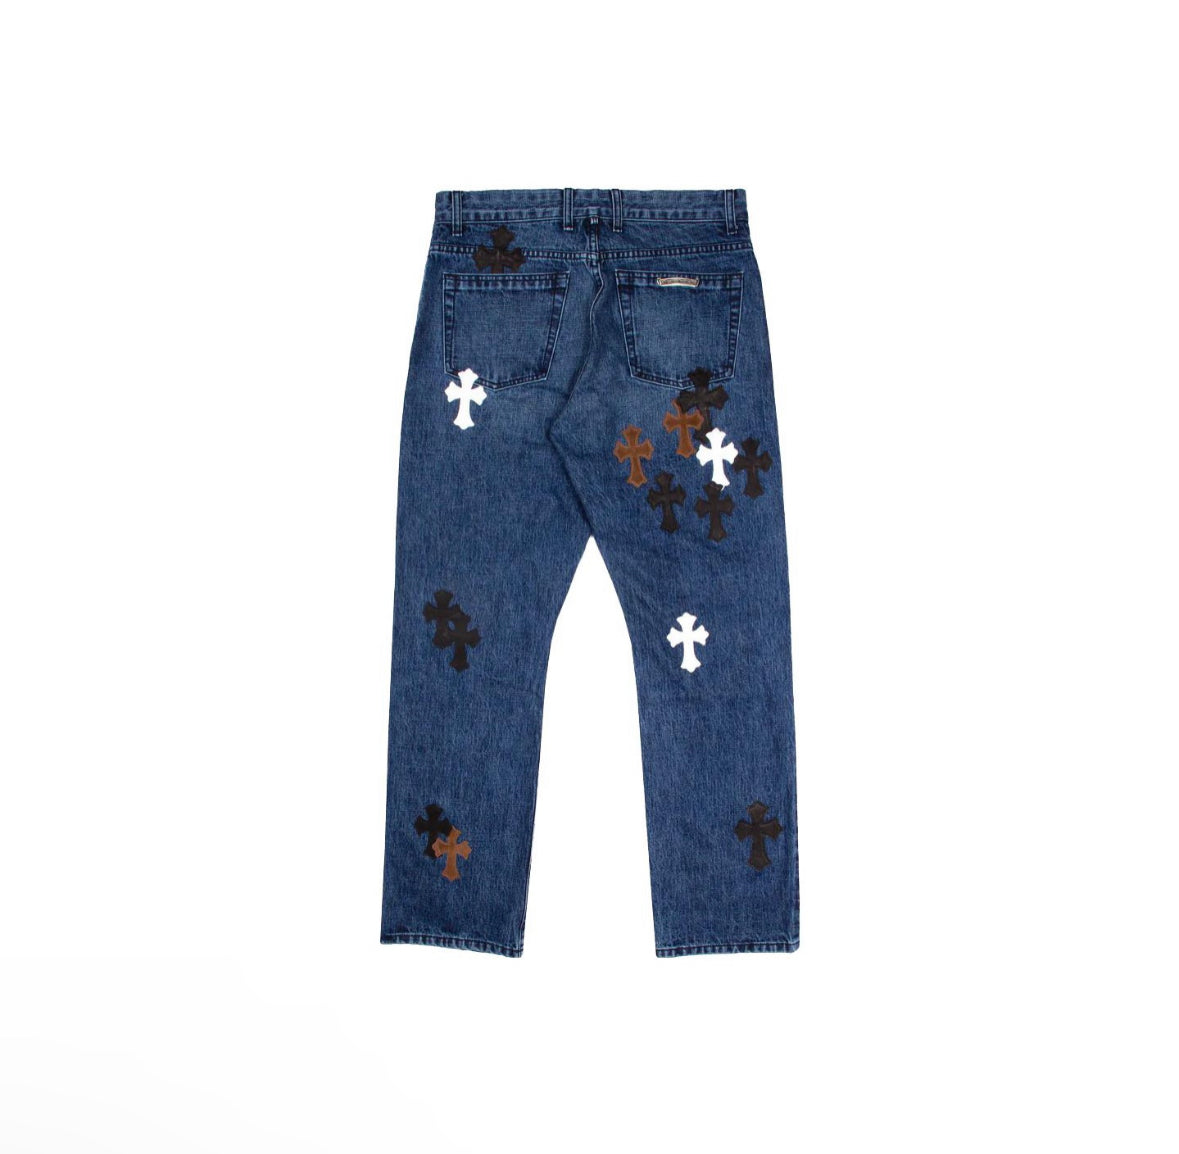 Chrome Hearts Made to Order Cross Jeans